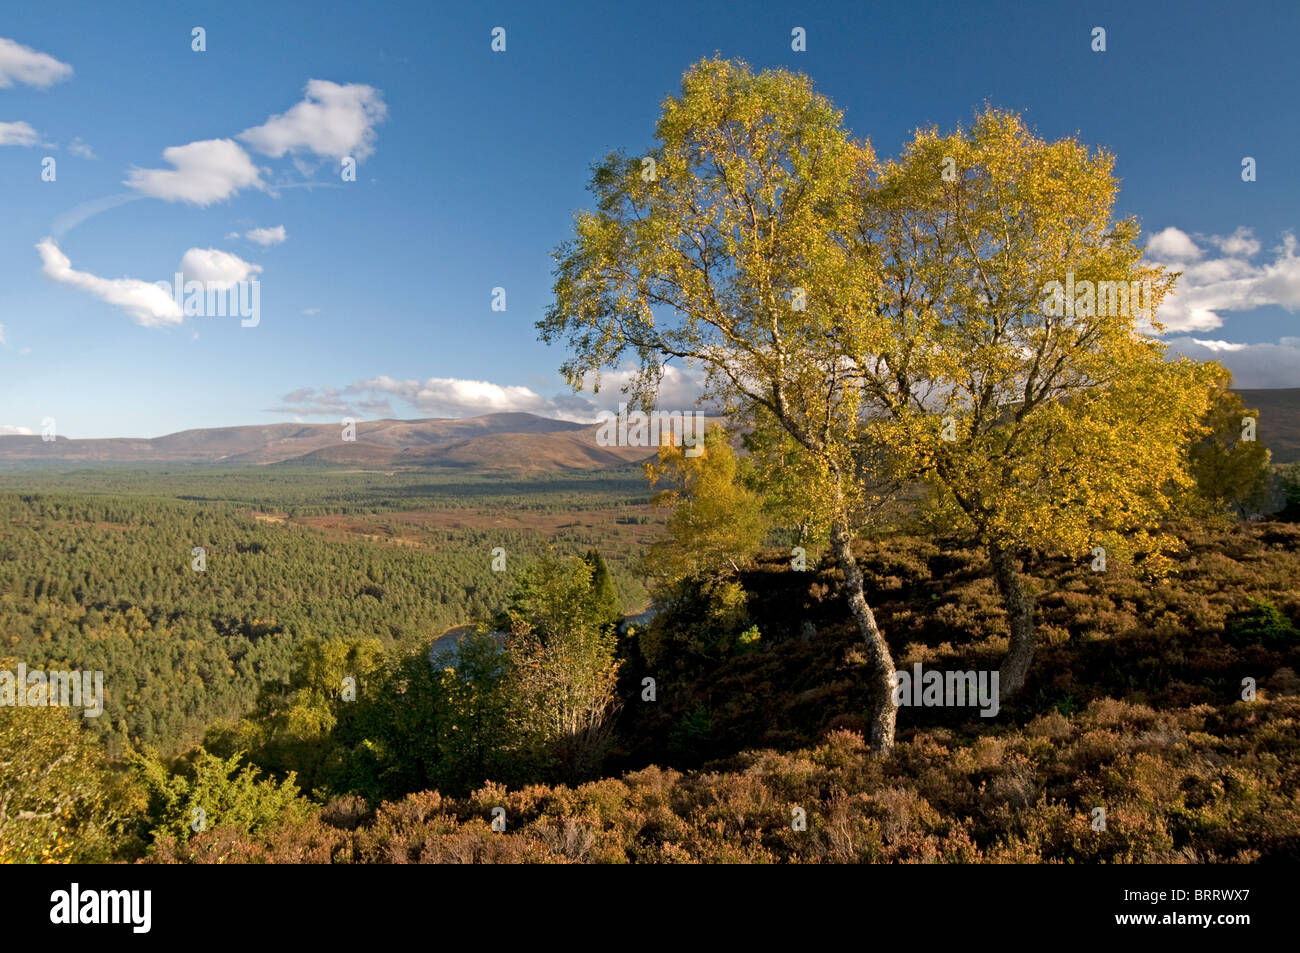 The Cairngorm mountains from Ord Ban hill, Rothiemurchus, Aviemore, Highland Region, Scotland.  SCO 6821 Stock Photo